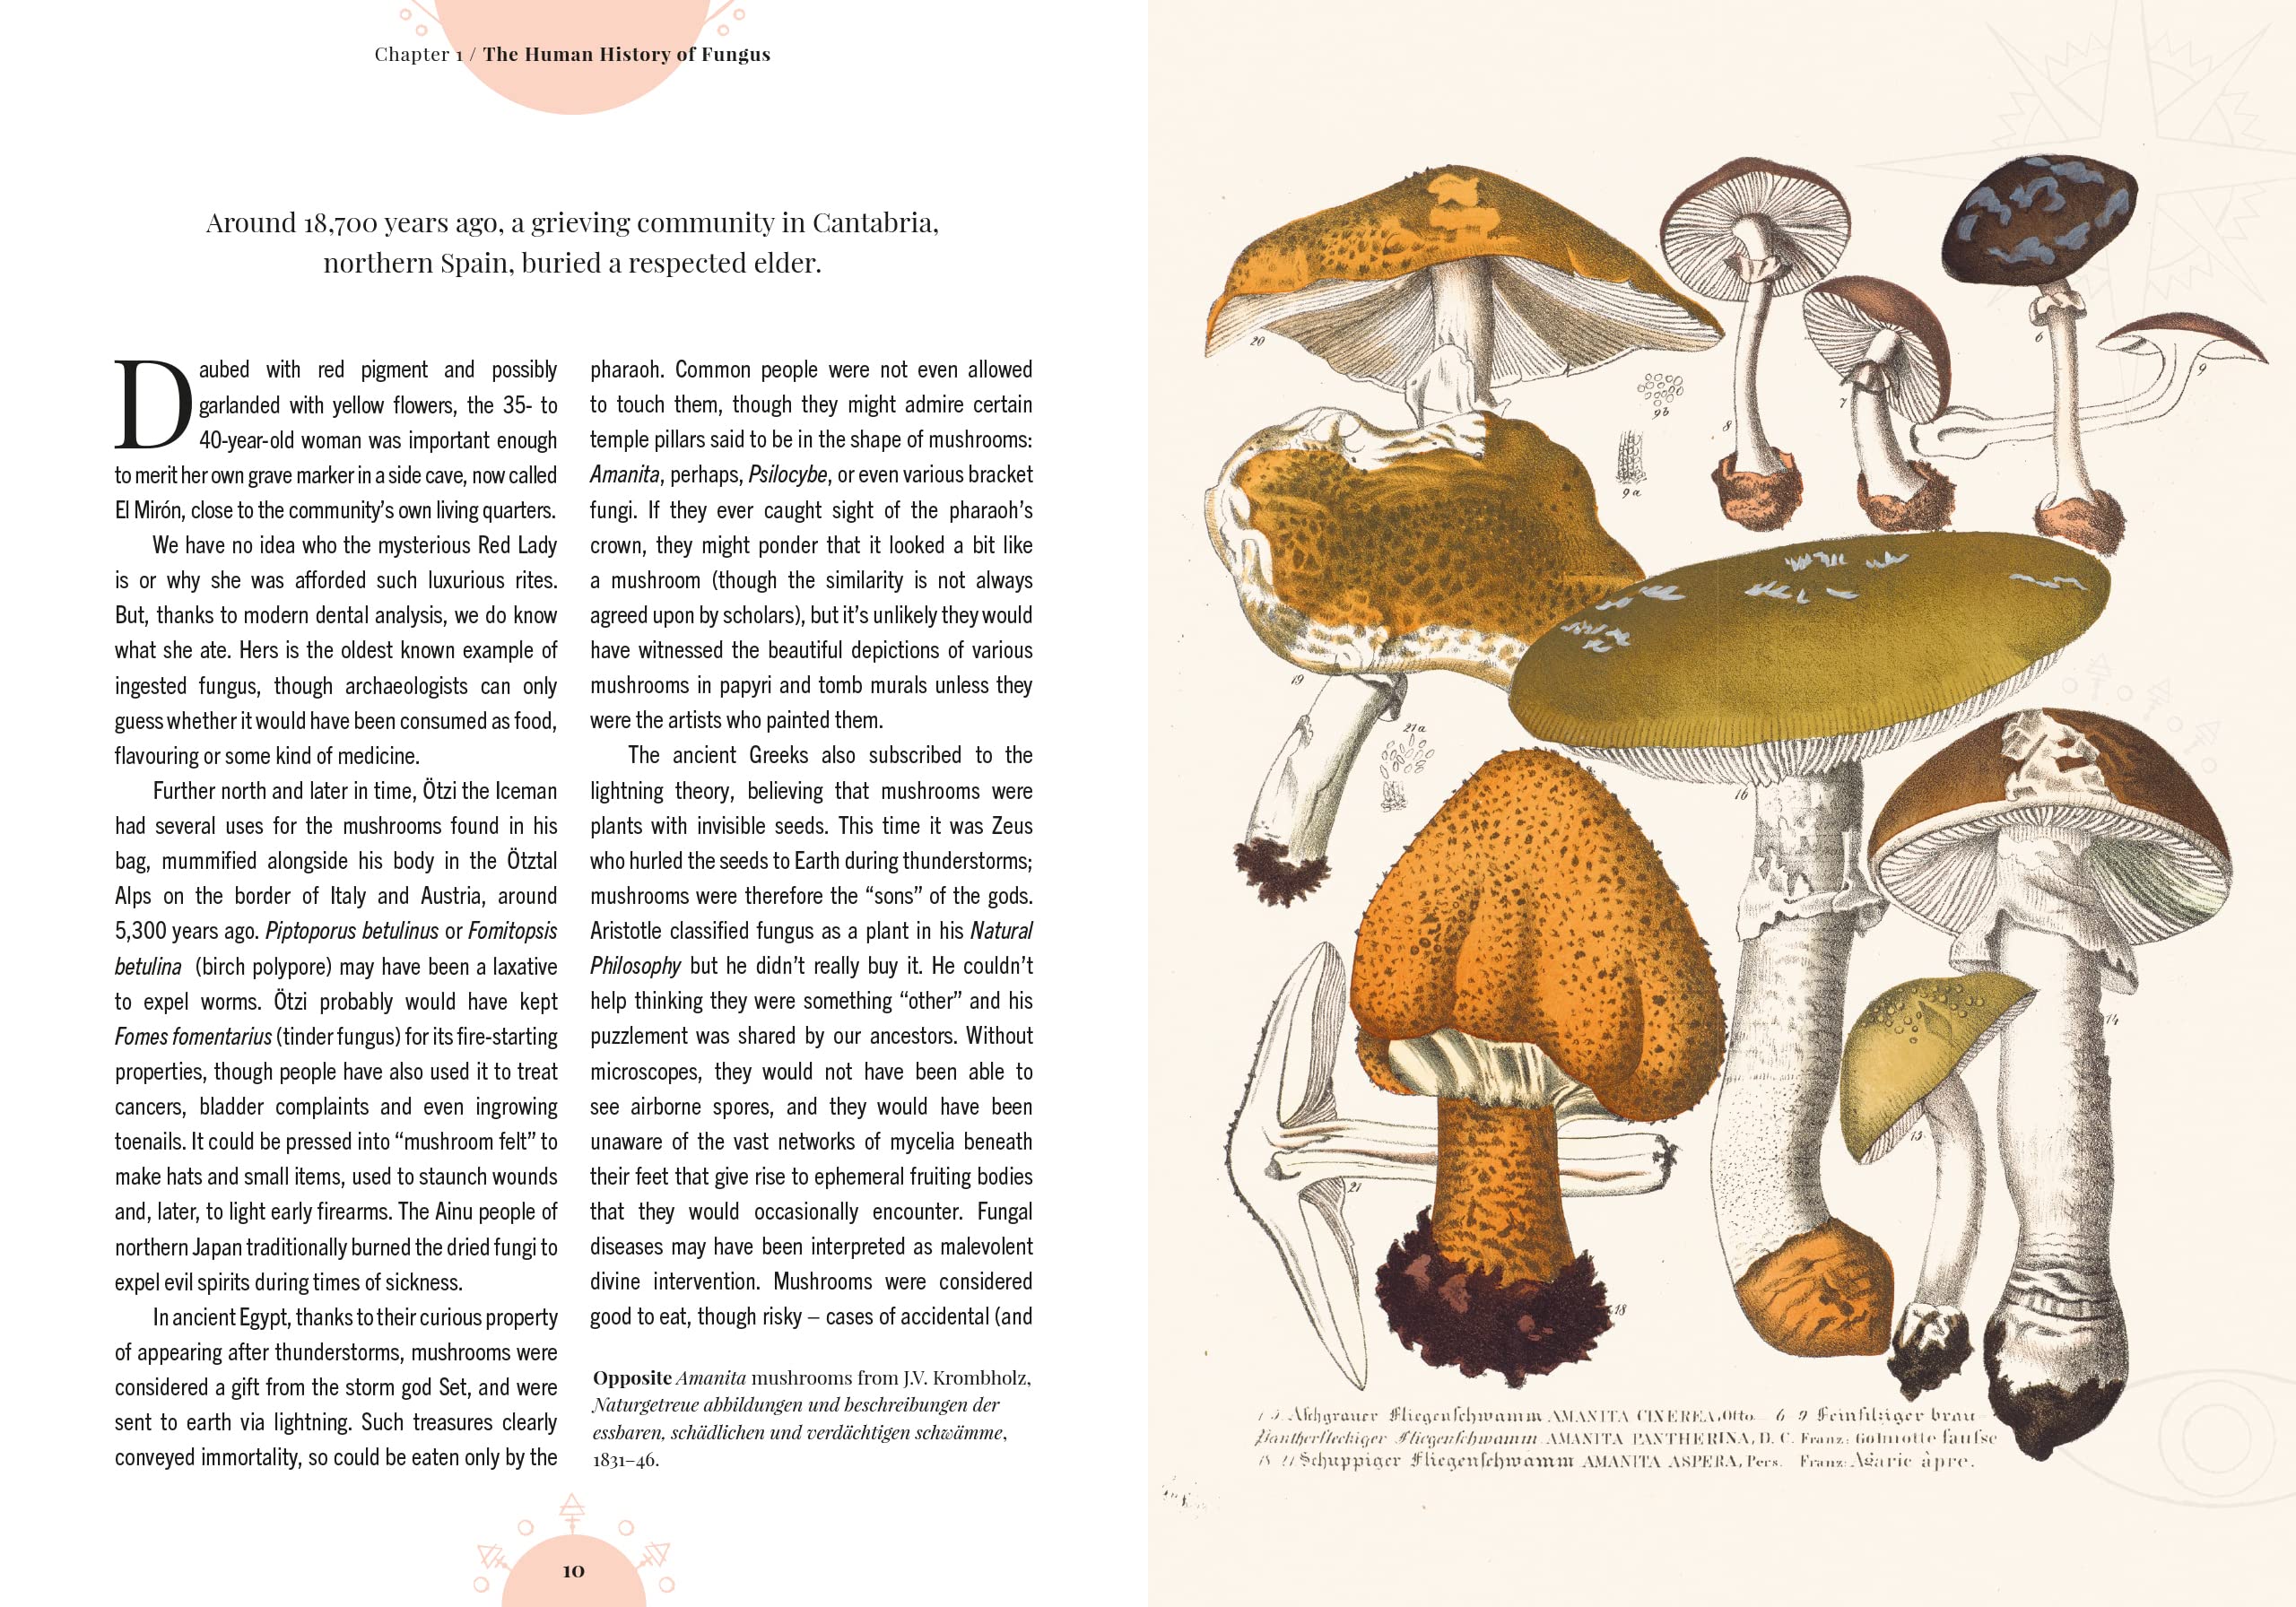 The Magic of Mushrooms: Fungi in folklore, superstition and traditional medicine-hotRAGS.com